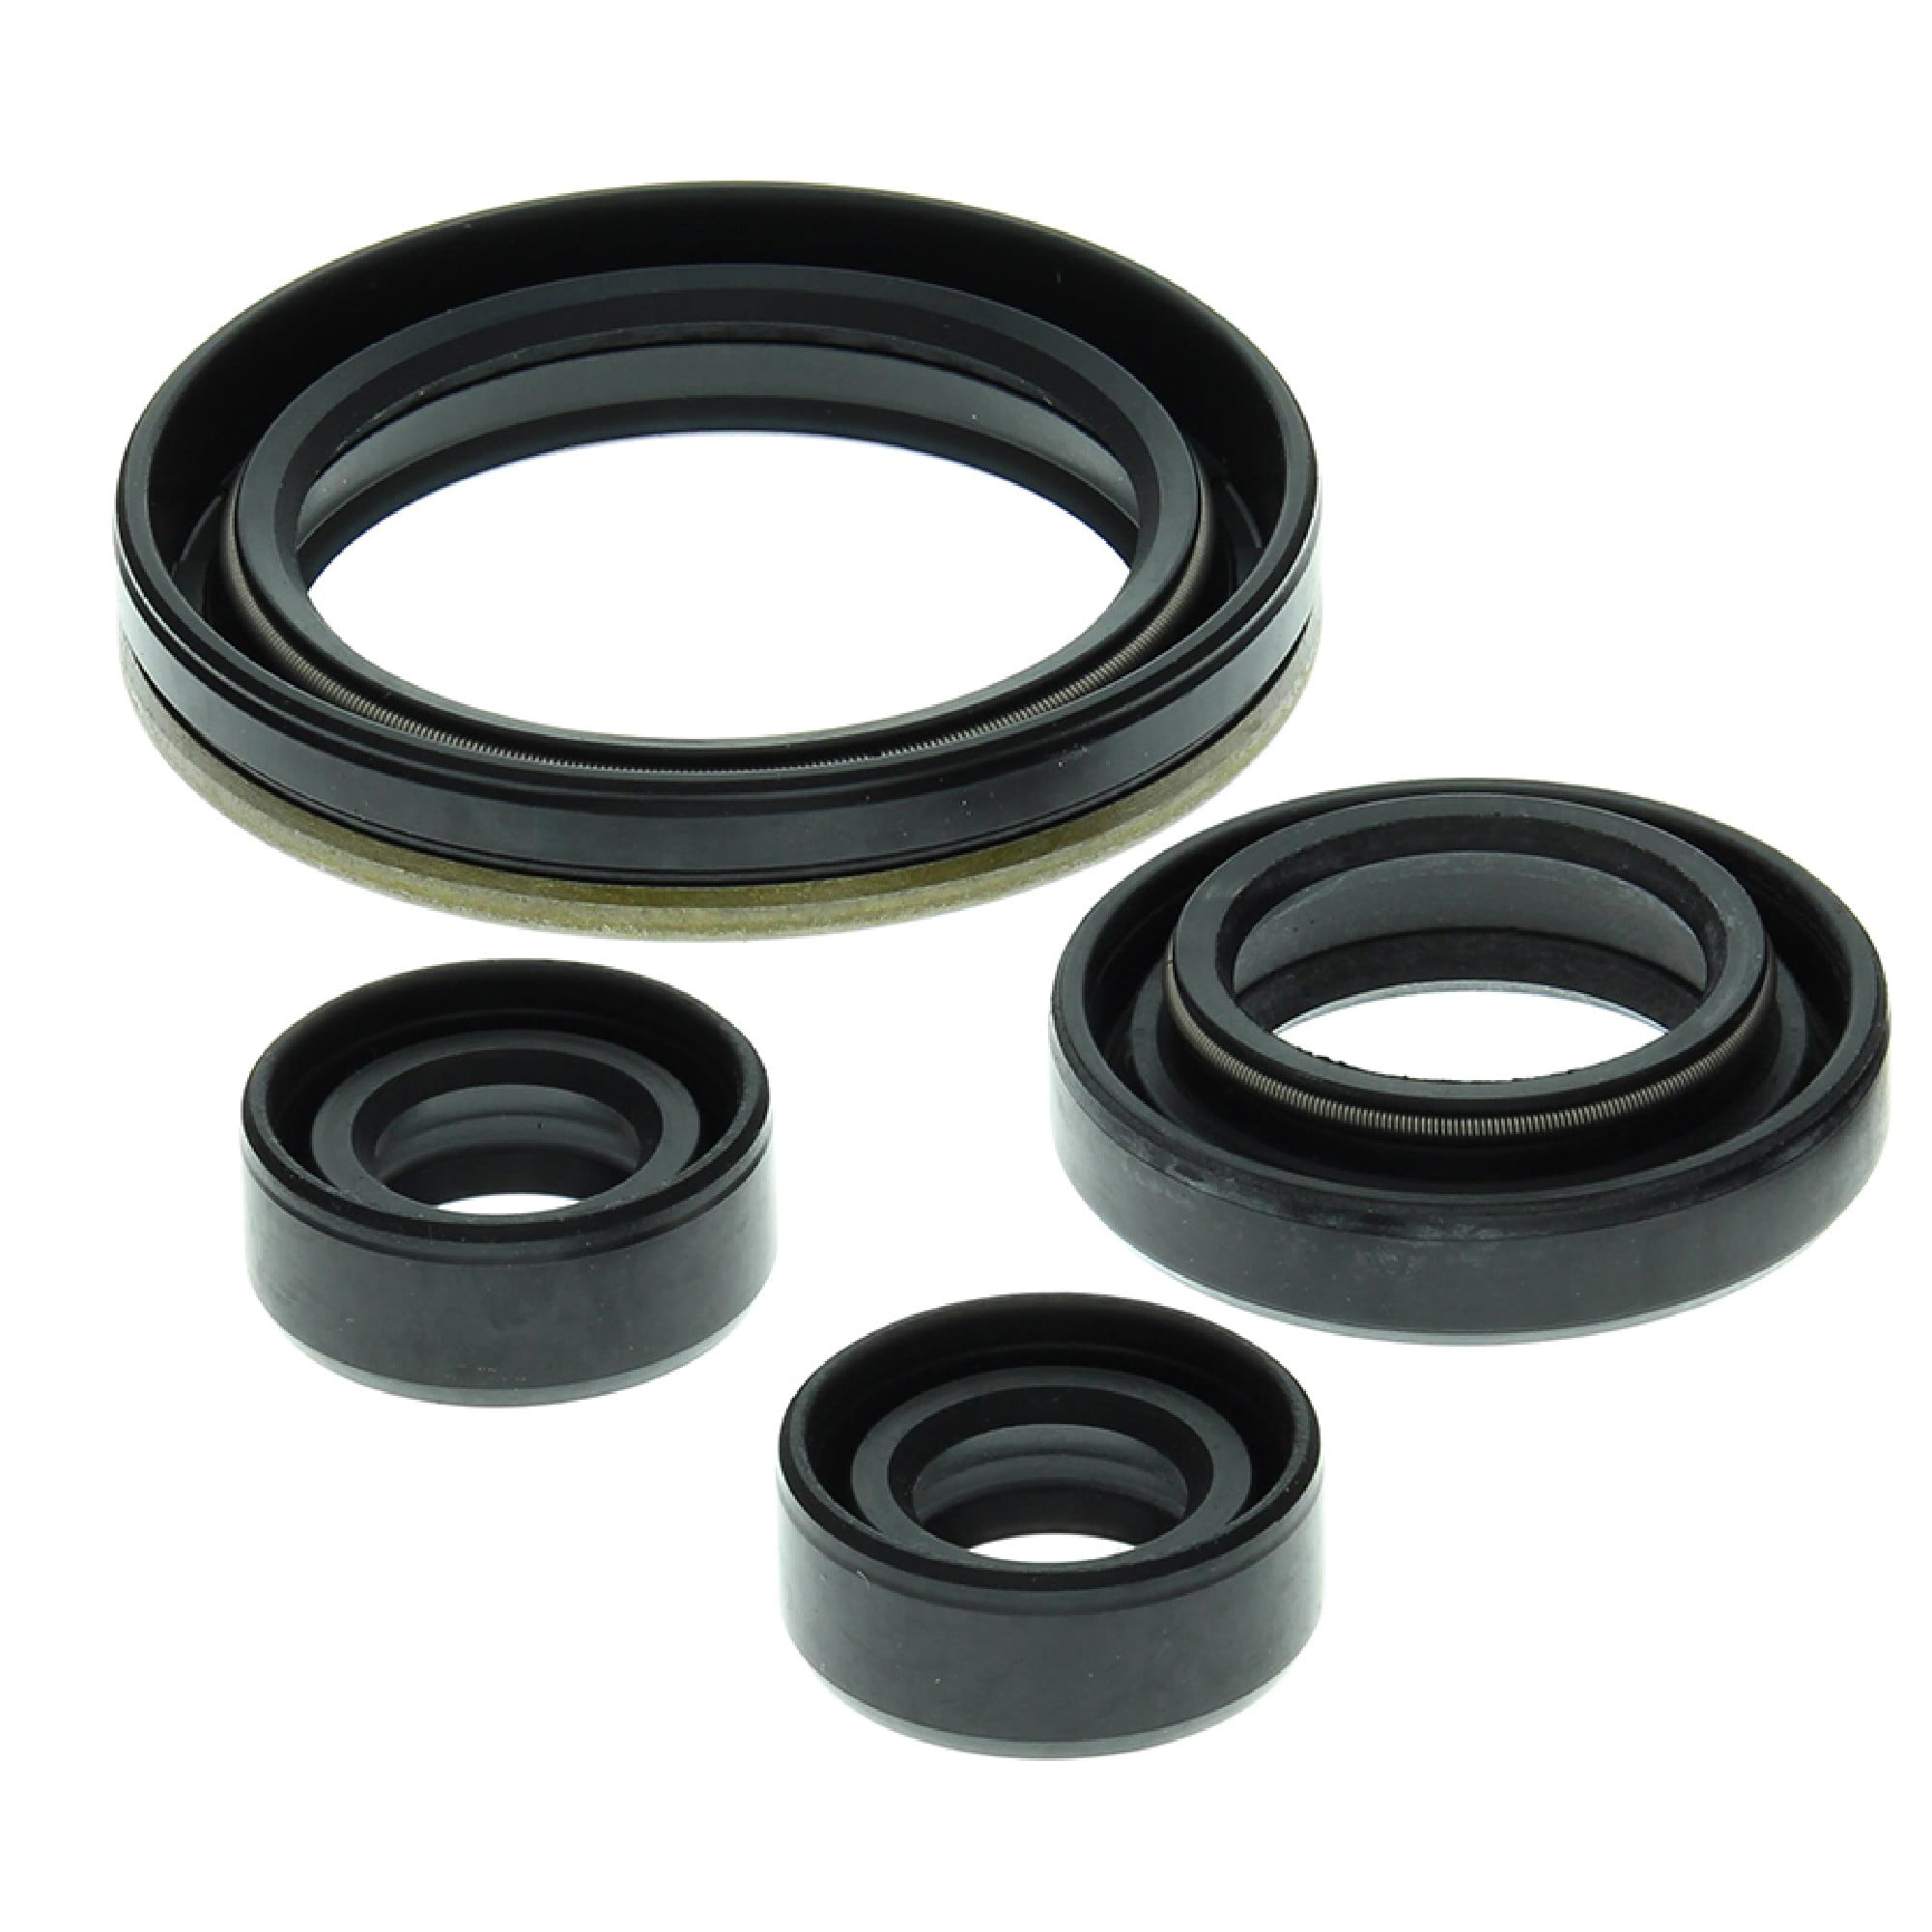 Complete Gasket Kit with Oil Seals For Suzuki LT-F160 1991-2001 160cc 